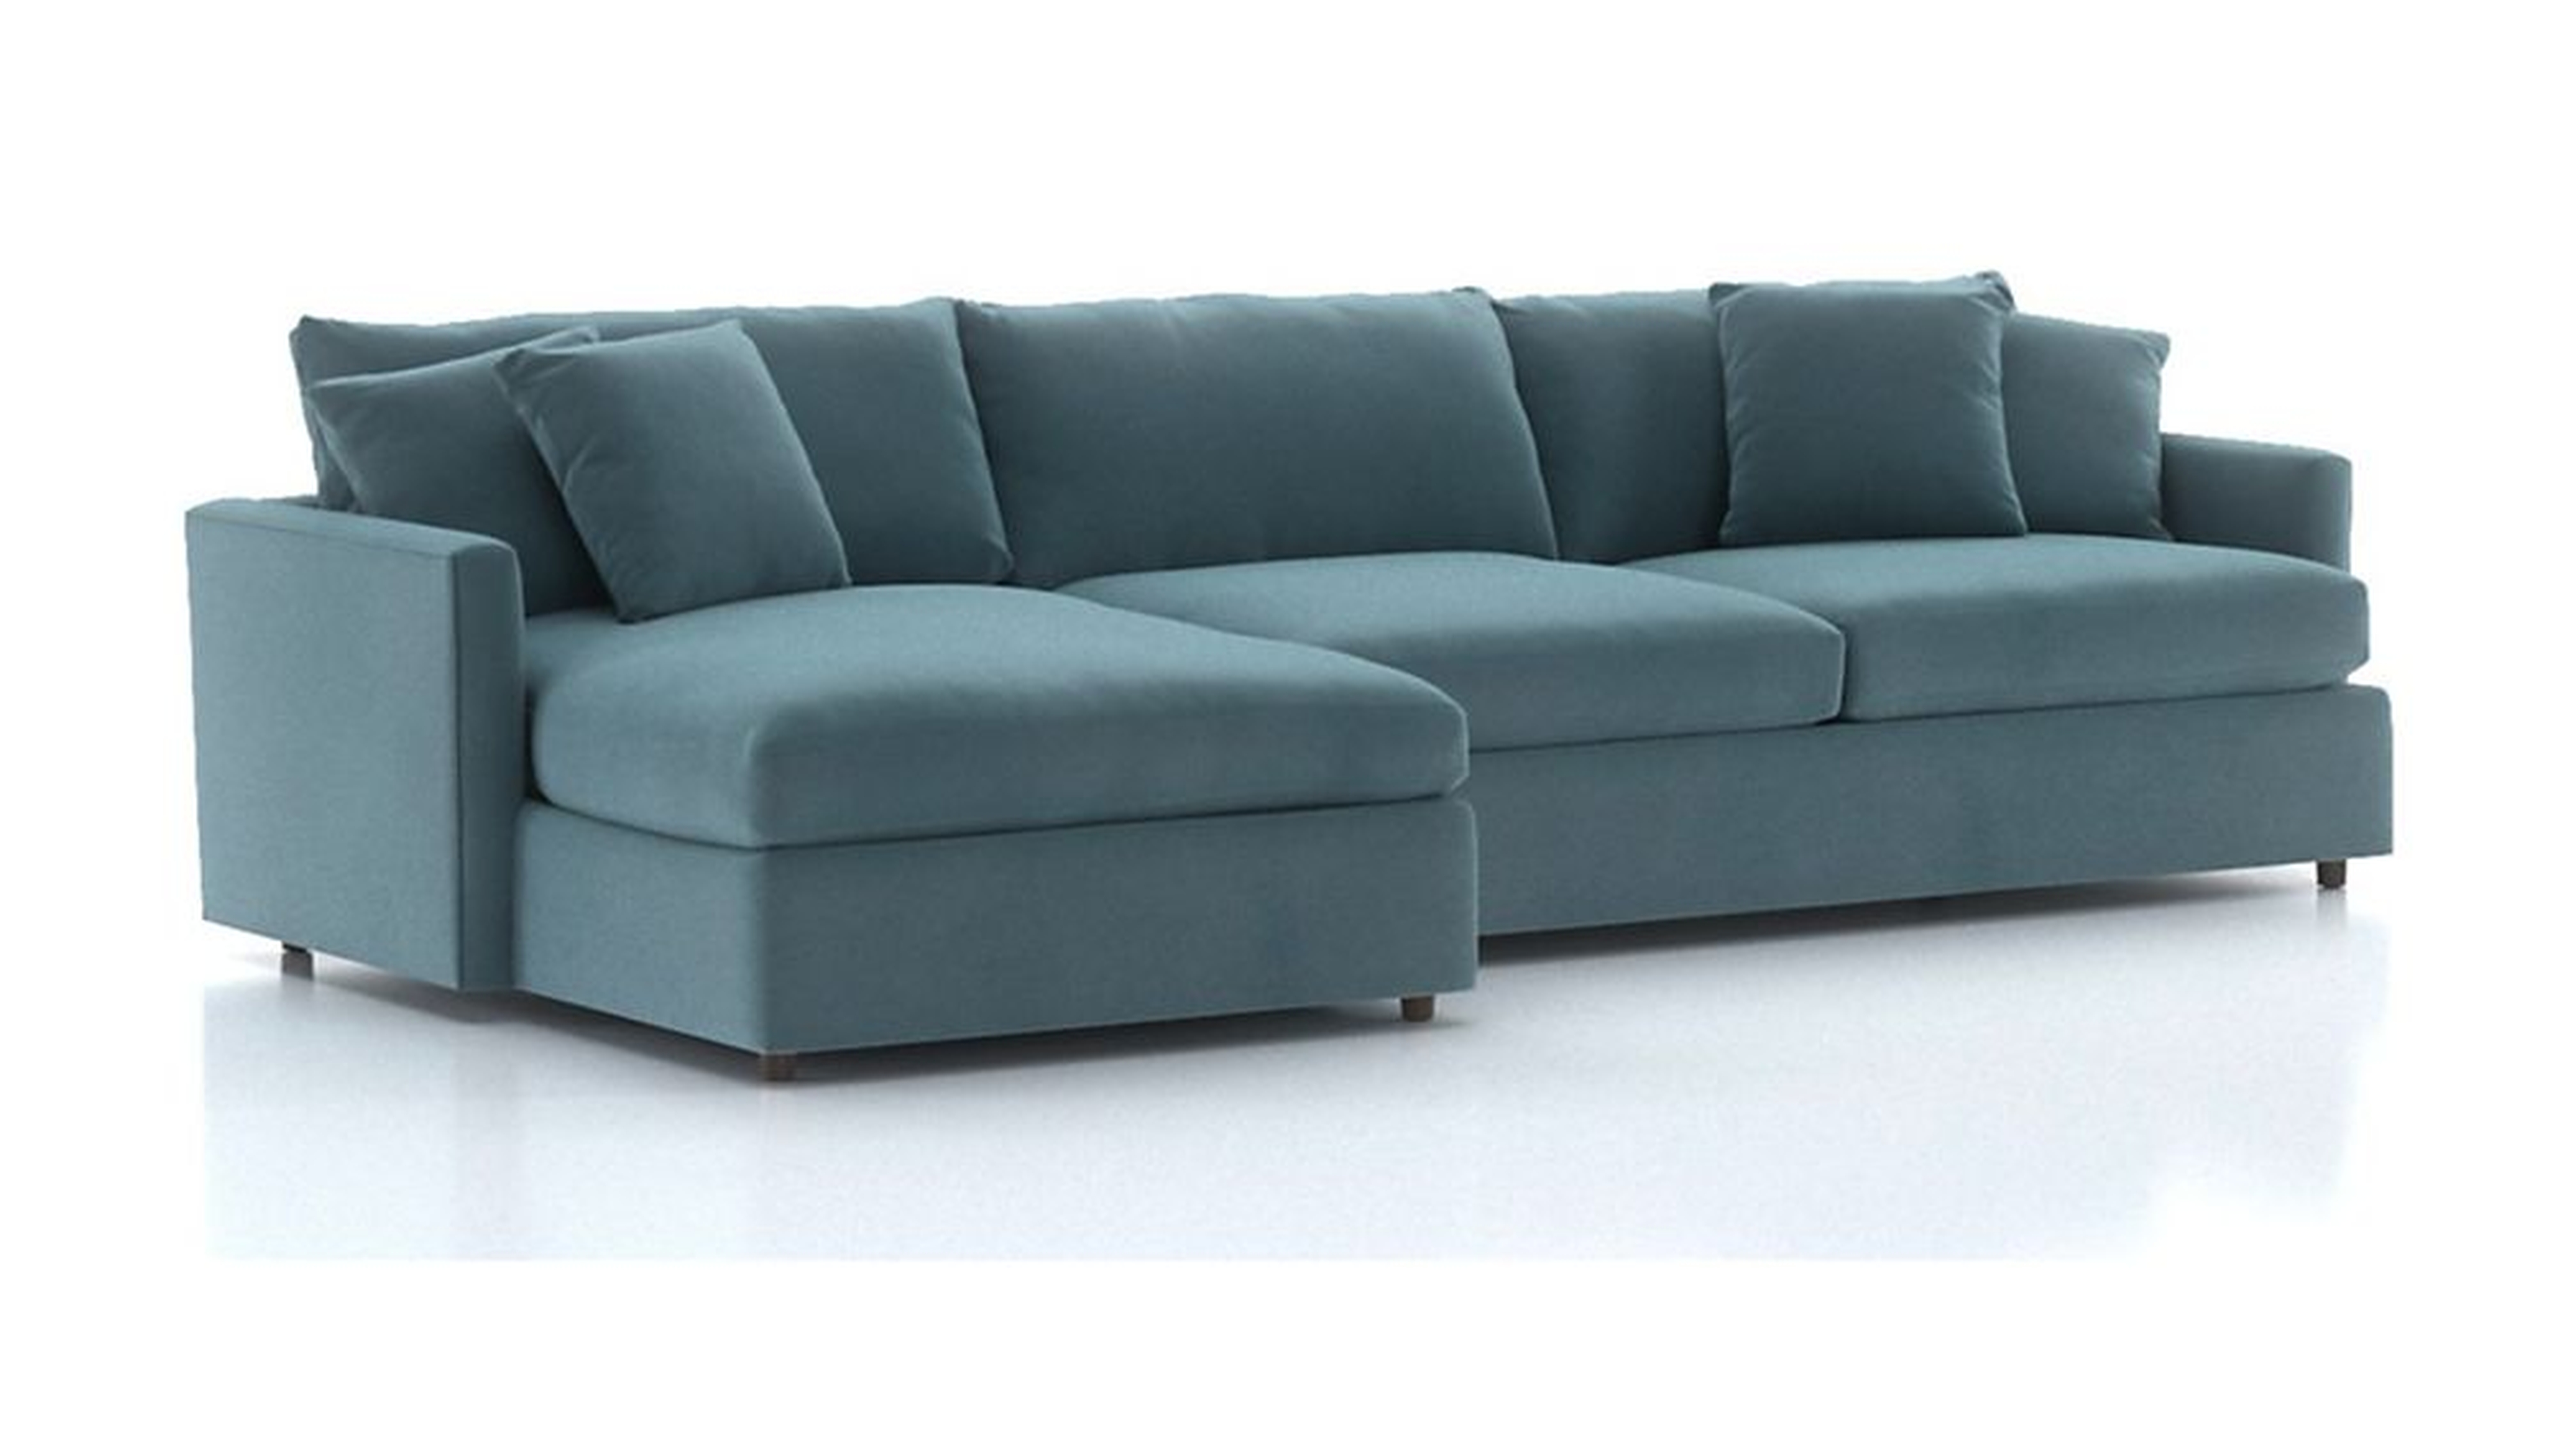 Lounge II 2-Piece Sectional Sofa- View, Nile - Crate and Barrel